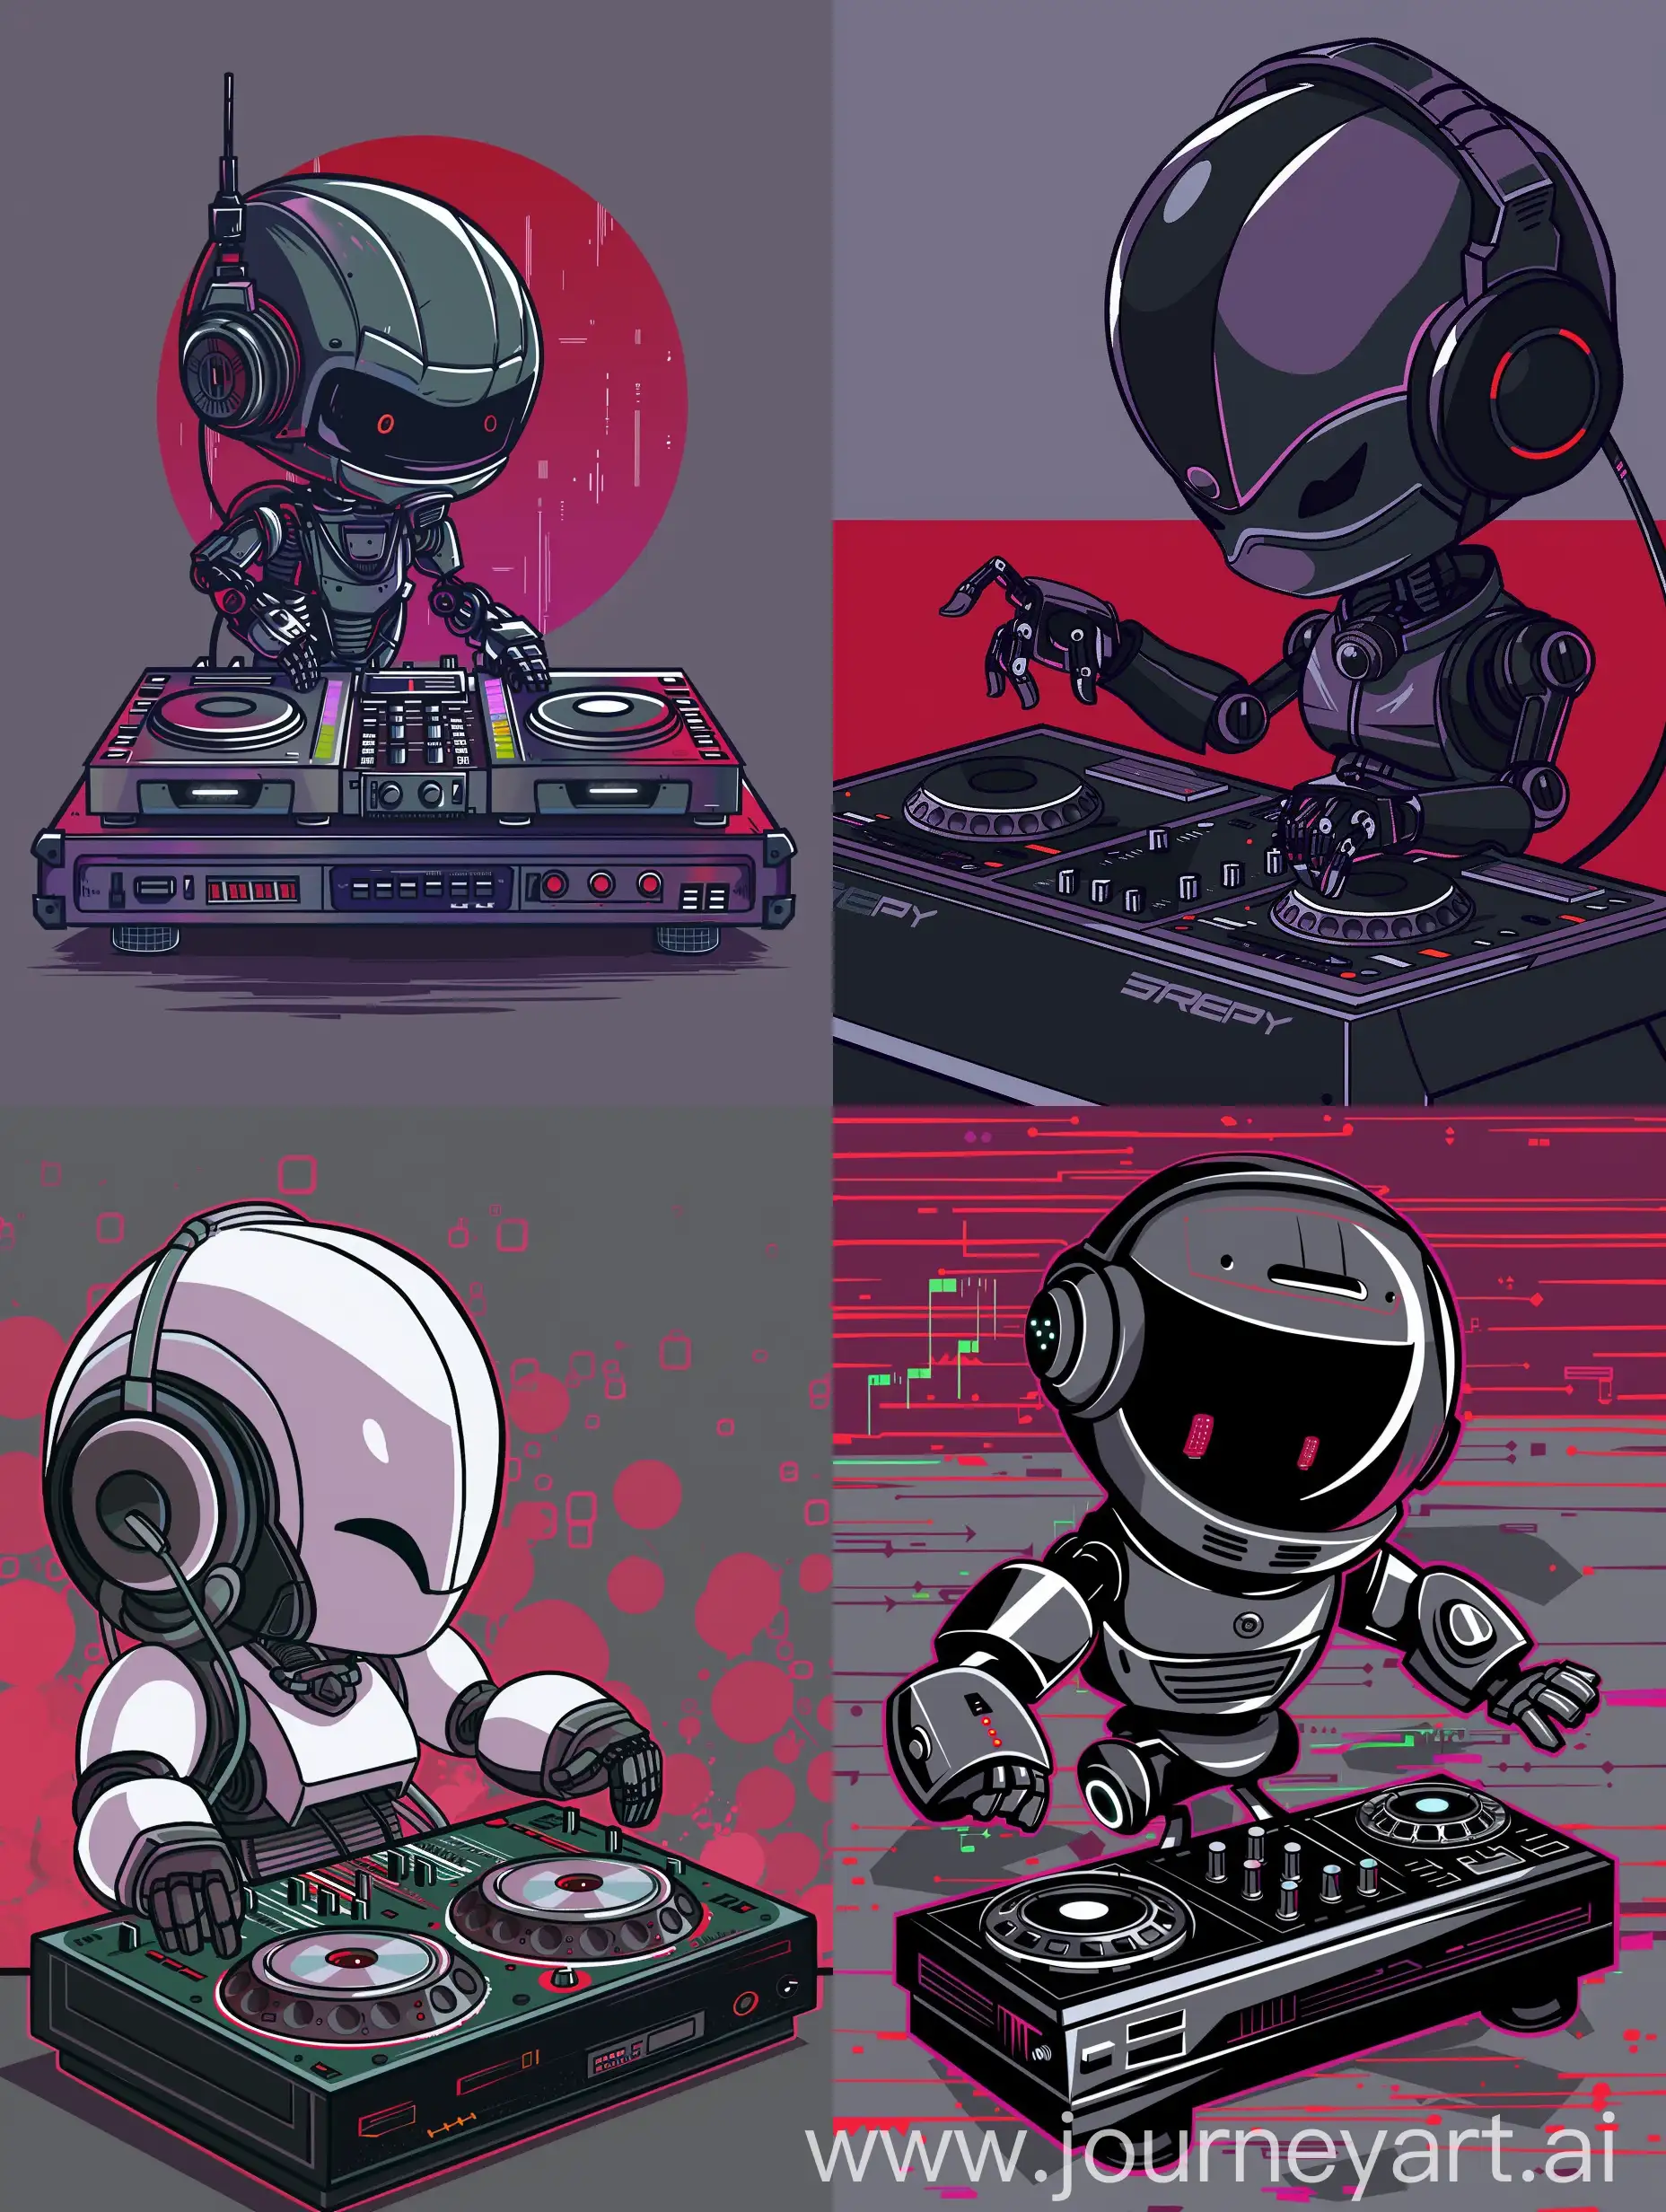 Chibi-Anime-Robot-DJ-Playing-in-Vibrant-Red-and-Purple-Scene